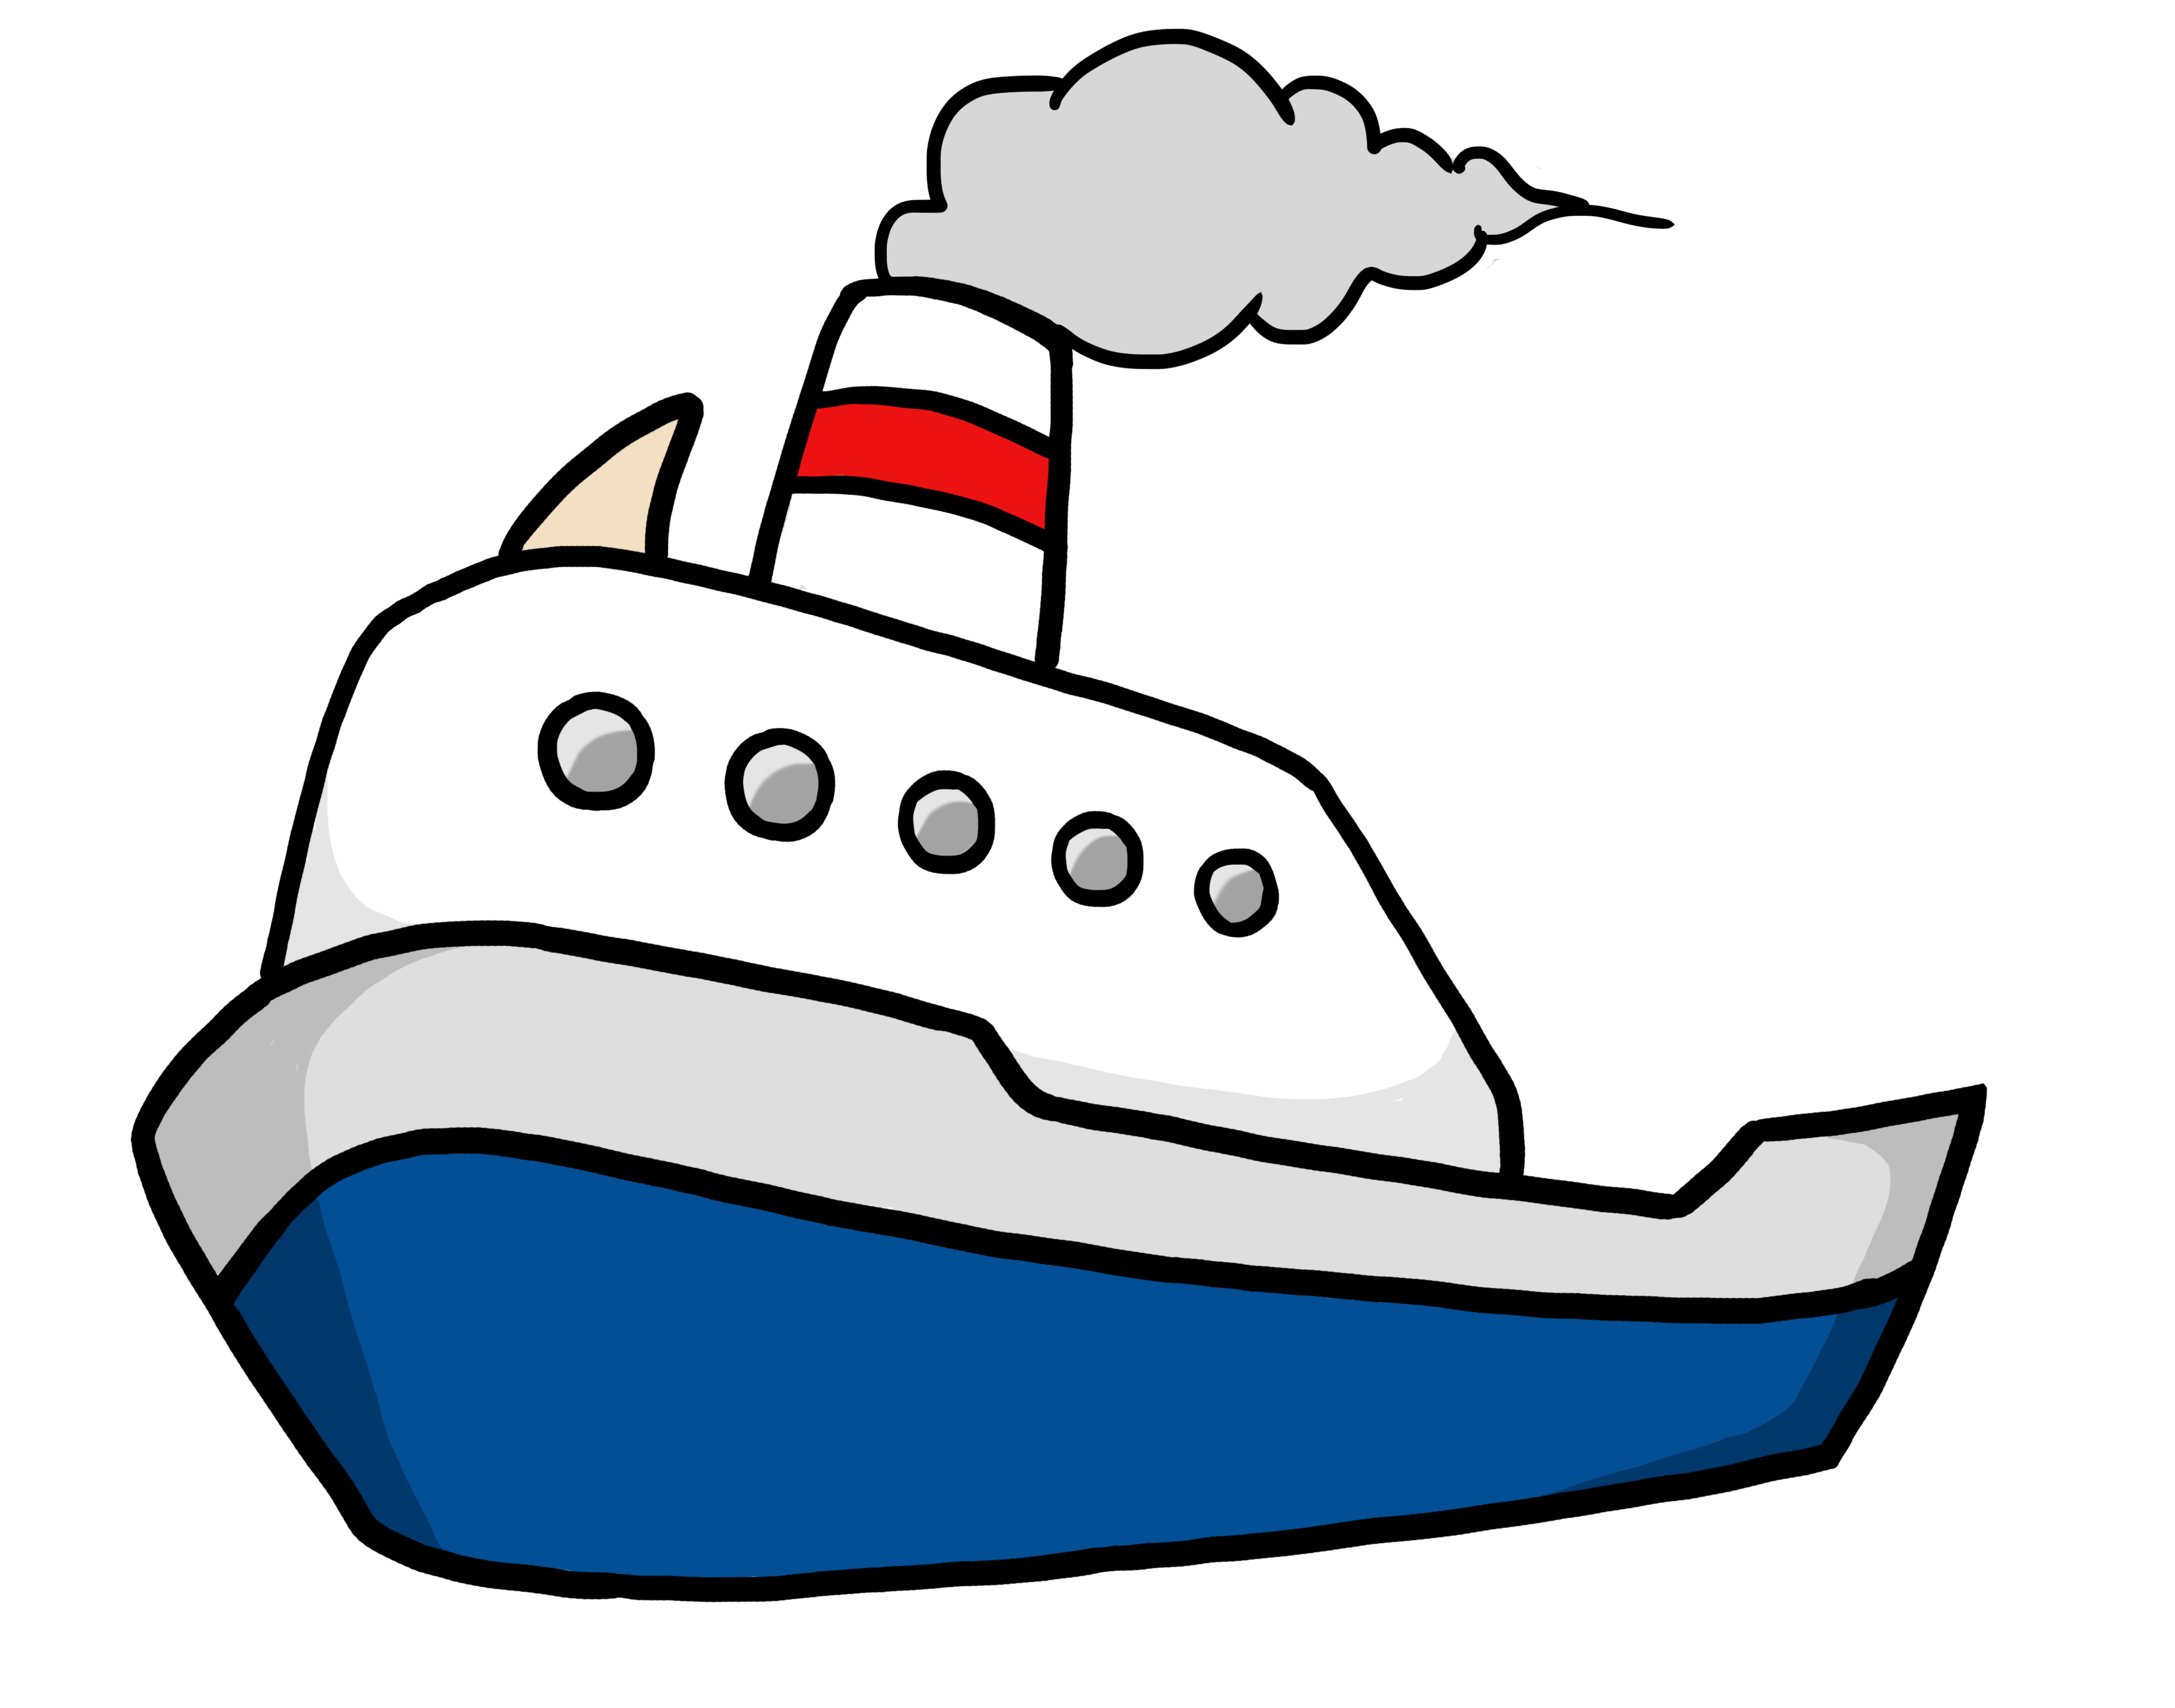 Image of Clipart Boat #2217, Speed Boat Clip Art Free - Clipartoons